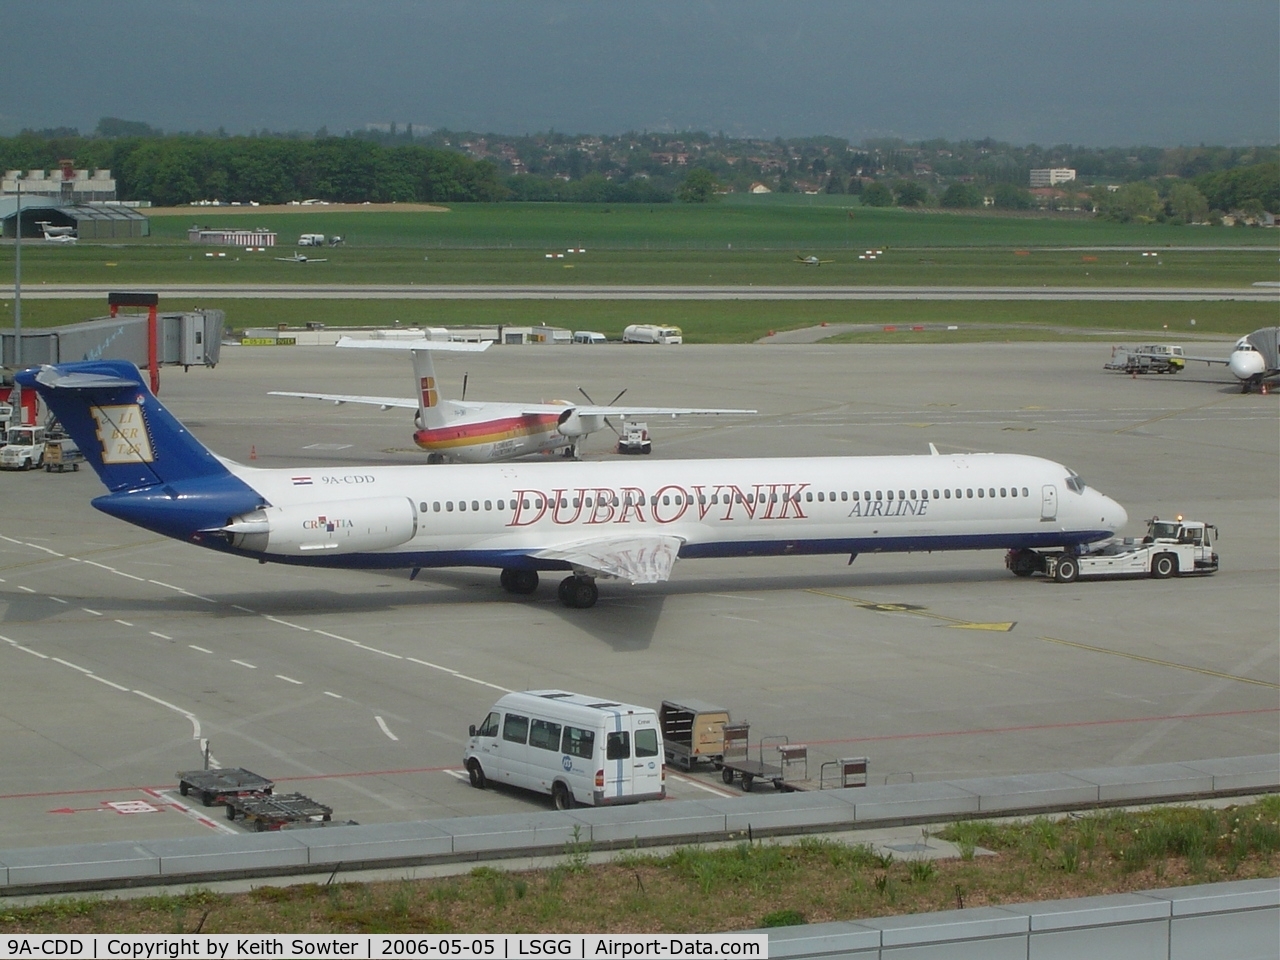 9A-CDD, 1982 McDonnell Douglas MD-82 (DC-9-82) C/N 49113, Ready for departure